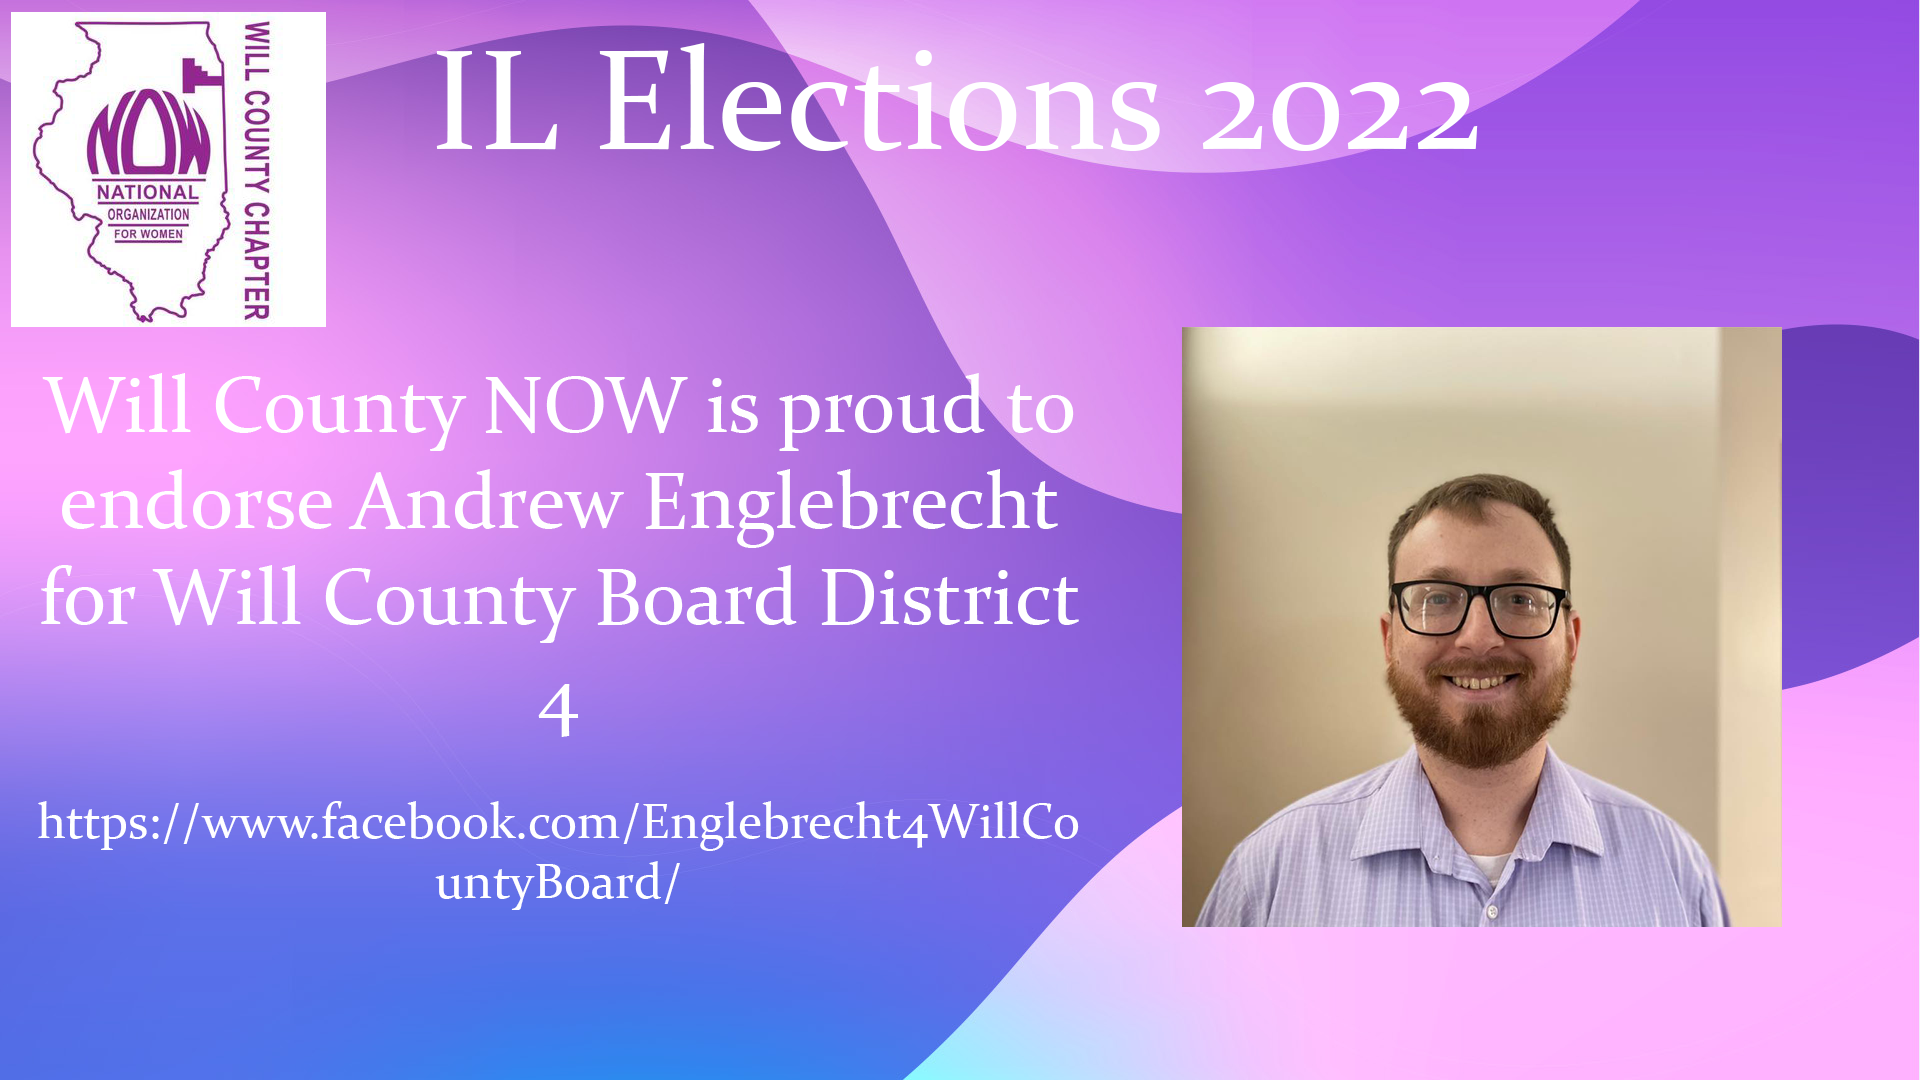 Will County NOW Endorses Andrew Englebrecht for Will County Board District 4